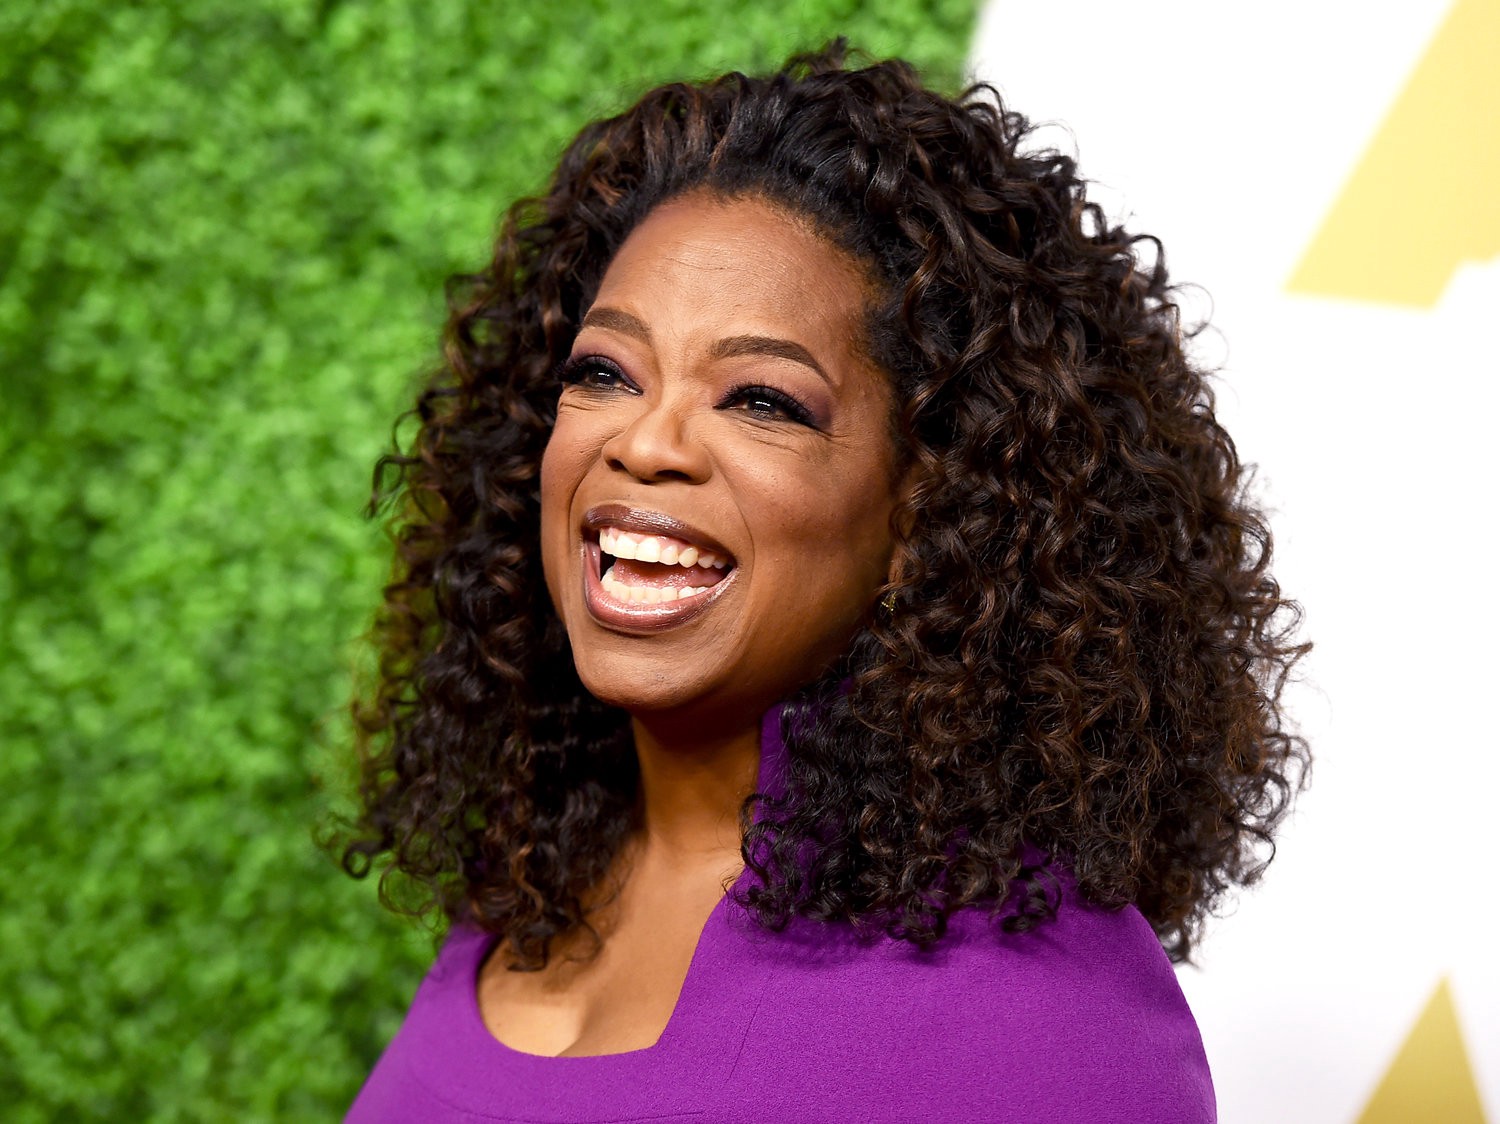 If You Get 11/15 on This Final Jeopardy Quiz, You’re a “Jeopardy!” Genius 12 Oprah Winfrey